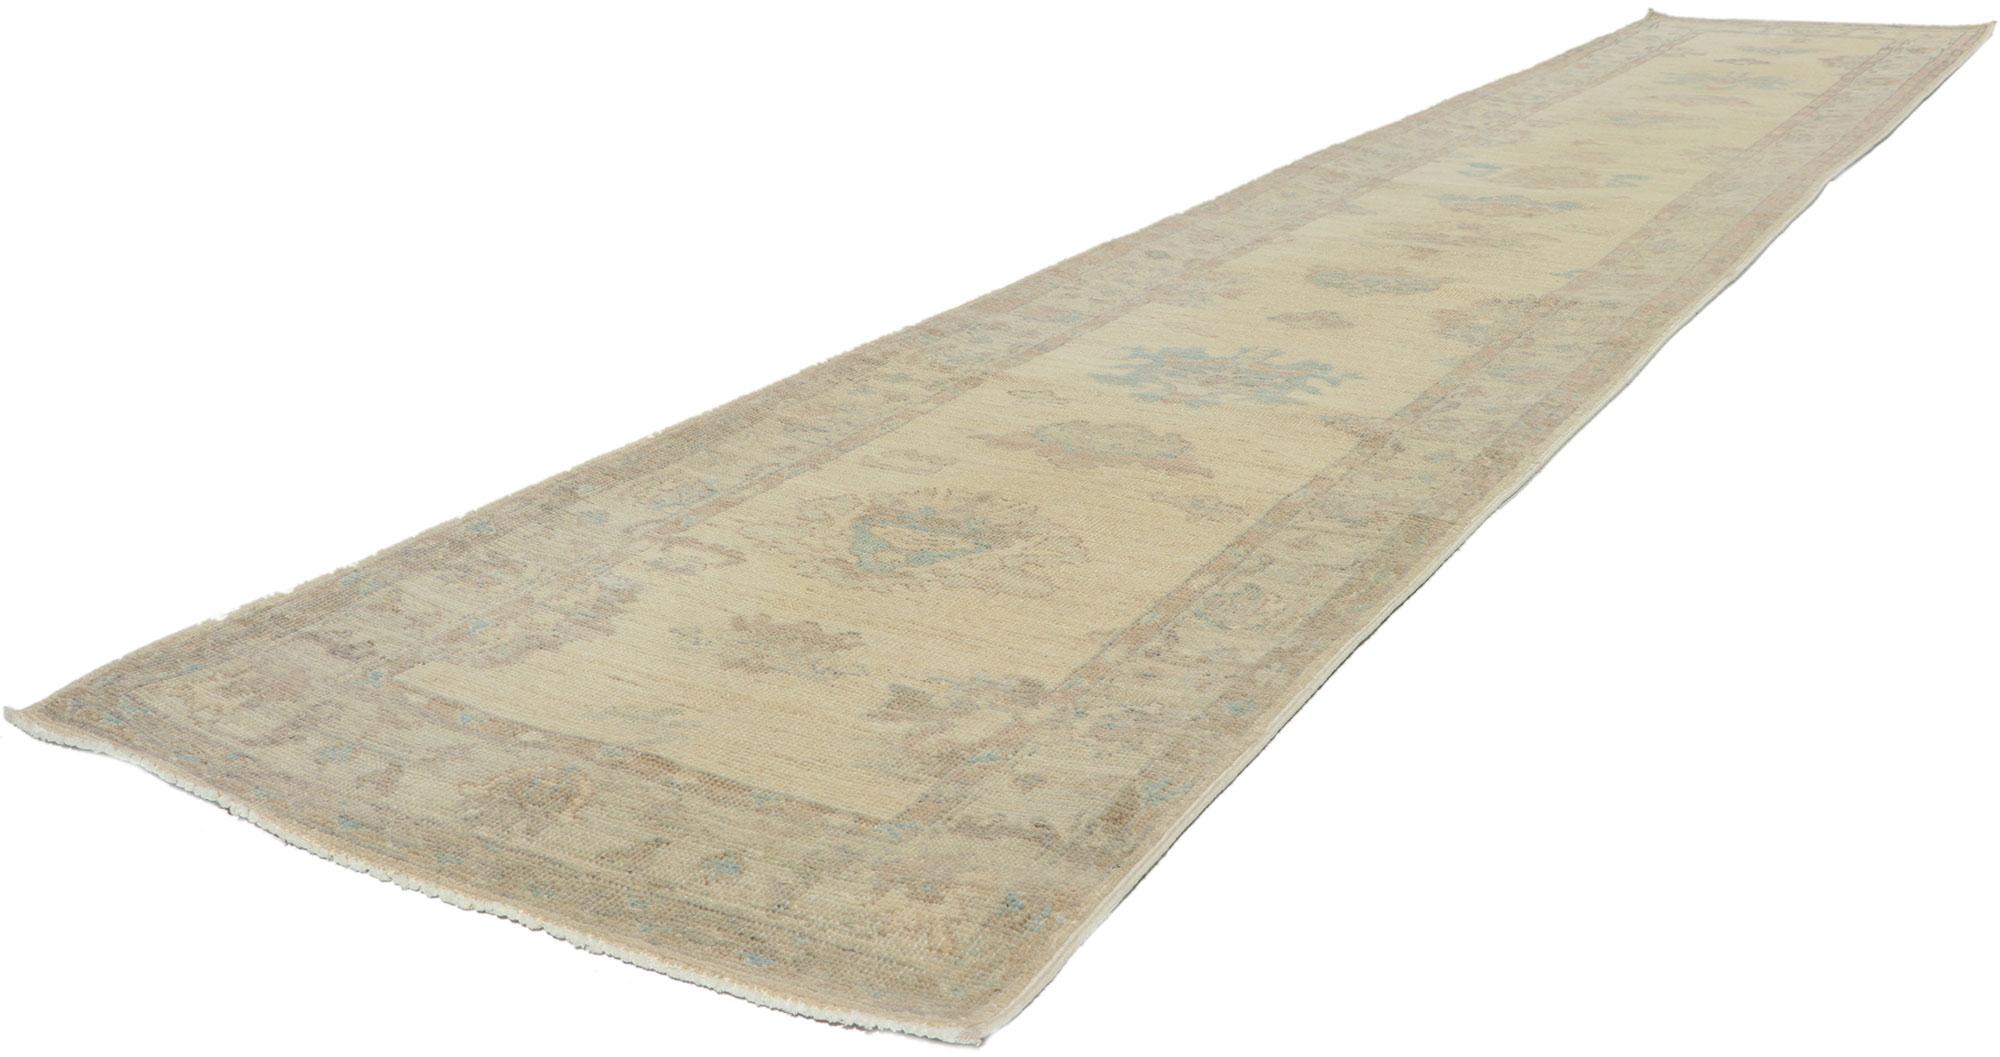 80843 Contemporary Oushak Runner, 02'05 x 13'08. Polished and playful, this hand-knotted wool contemporary Contemporary Oushak runner beautifully embodies a modern style. With elements of comfort, modern style and functional versatility, this Oushak